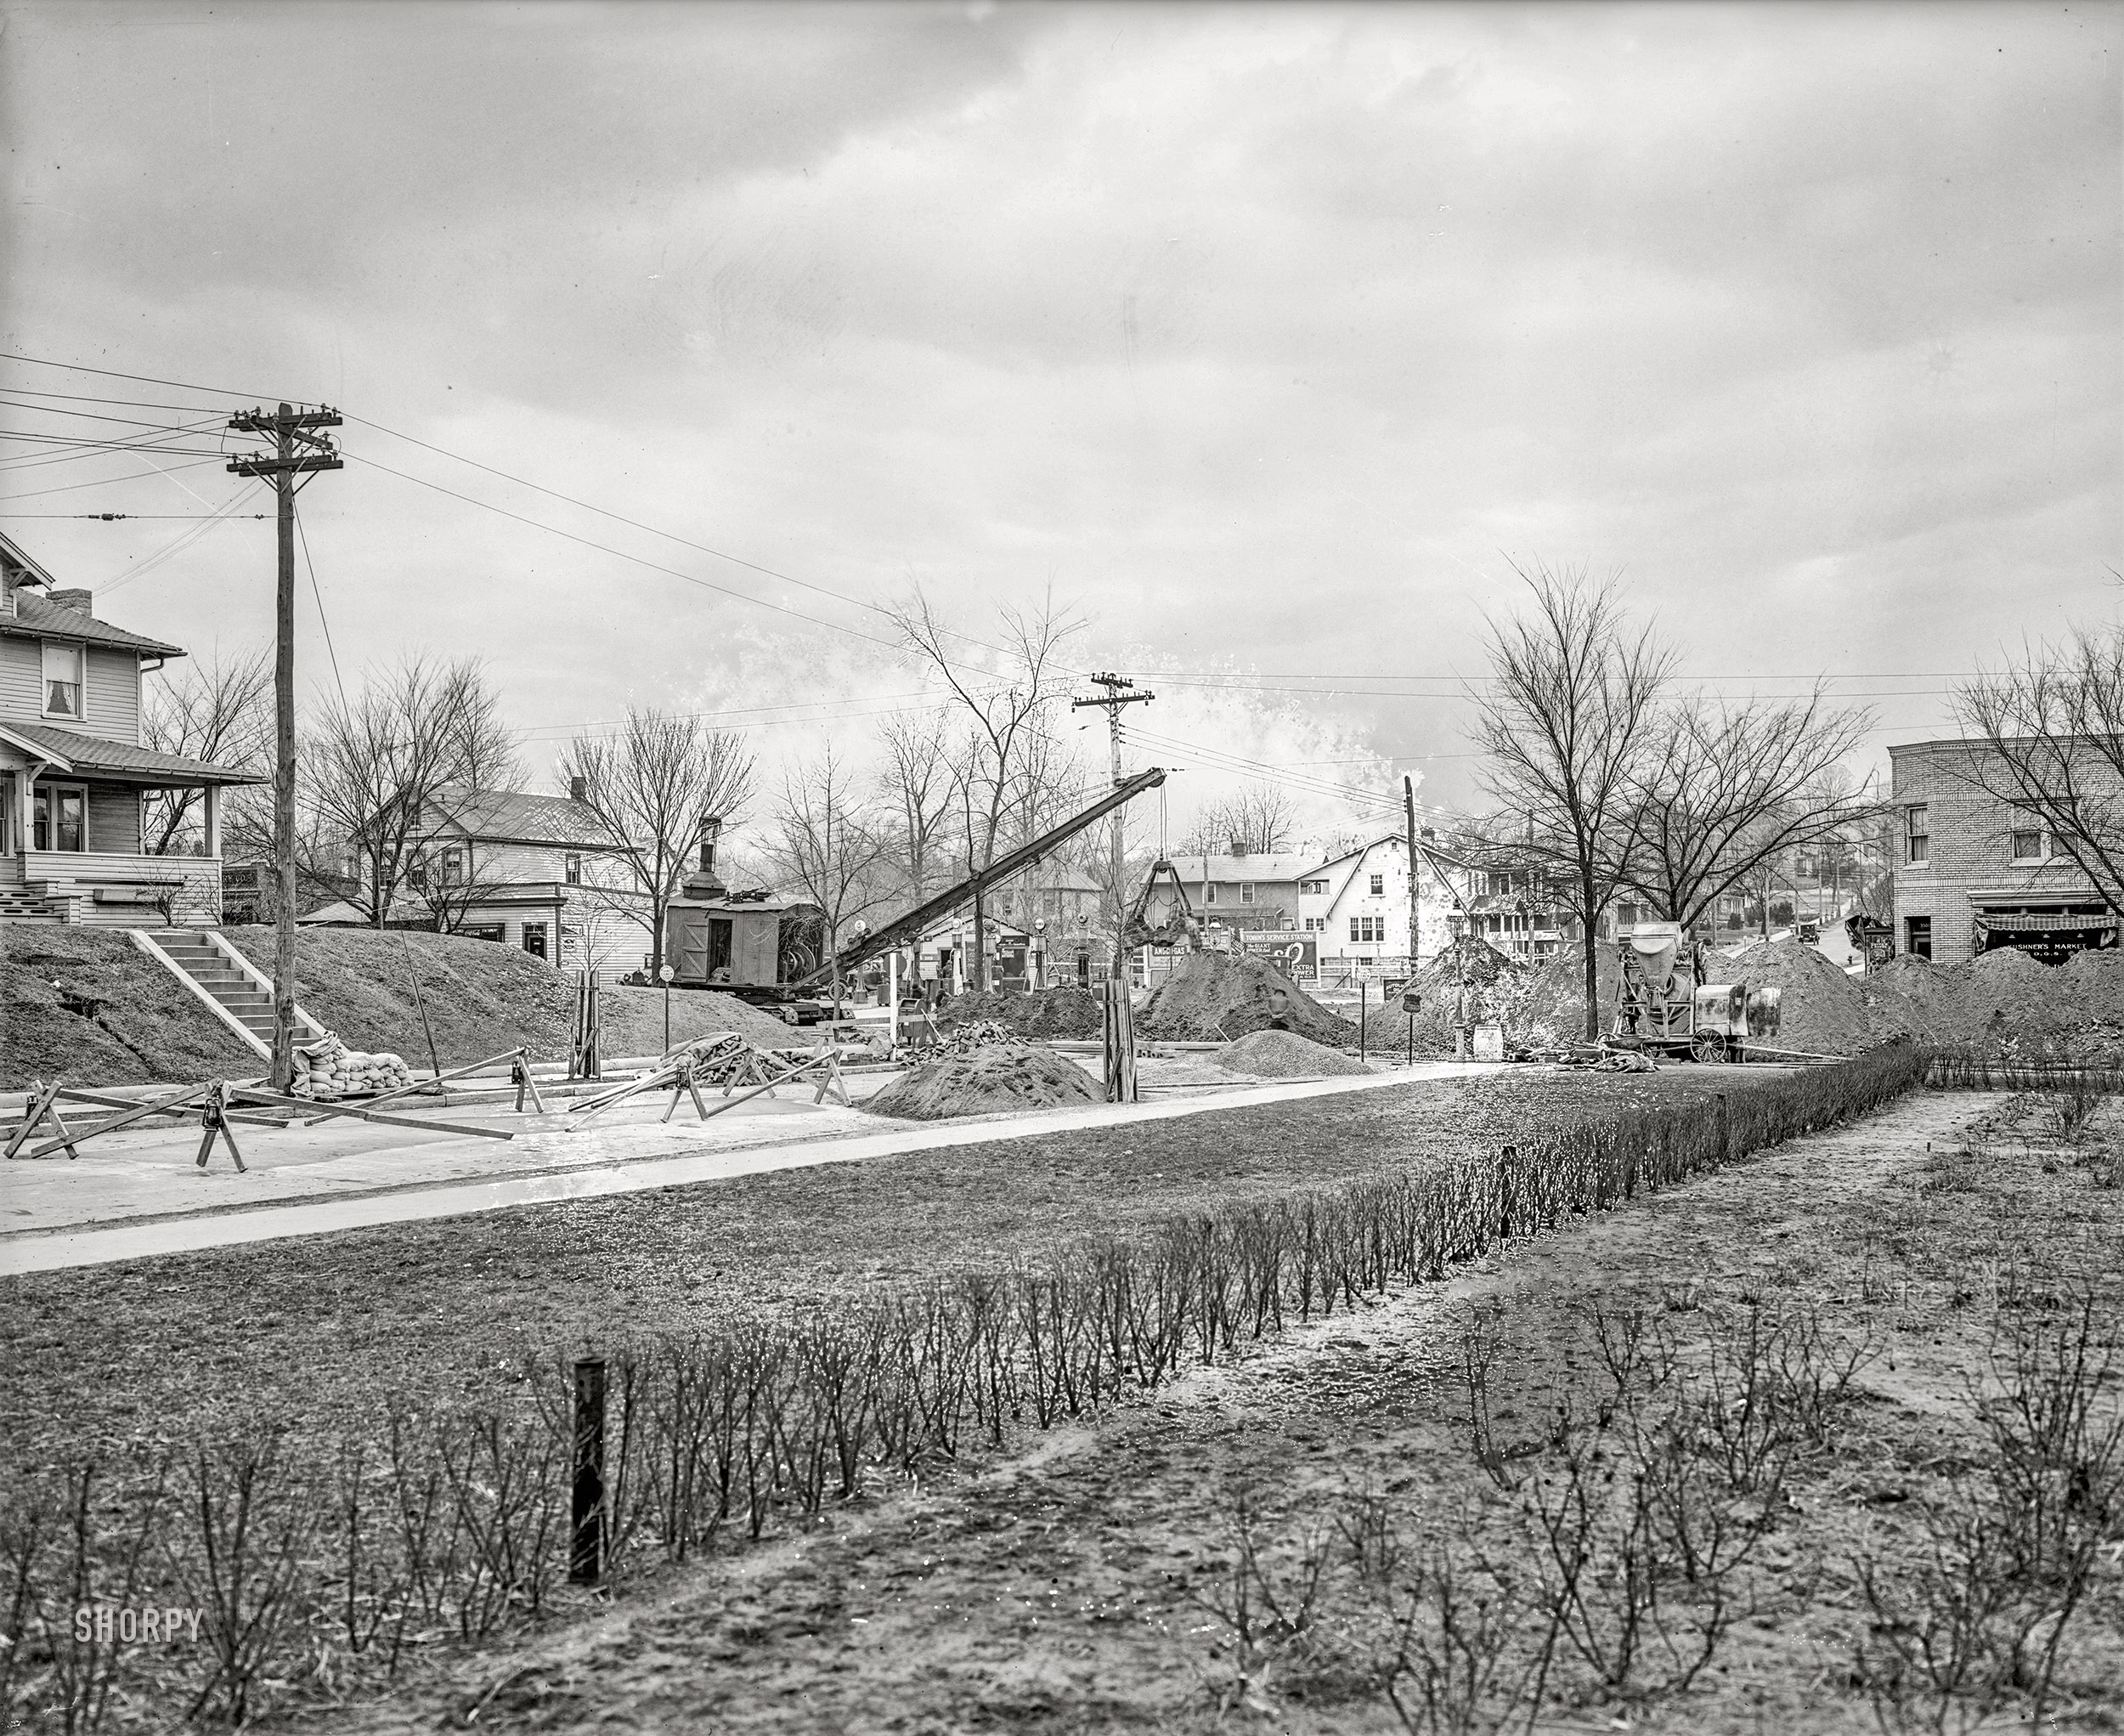 Washington, D.C., circa 1926. "S.W. Barrow," the caption on this National Photo glass negative, name-checks District real estate developer Samuel W. Barrow, who may have had something to do with this work near his home on Monroe Street N.E. (a neighborhood last seen here) at the intersection with 18th. Note the gas station in the background. View full size.